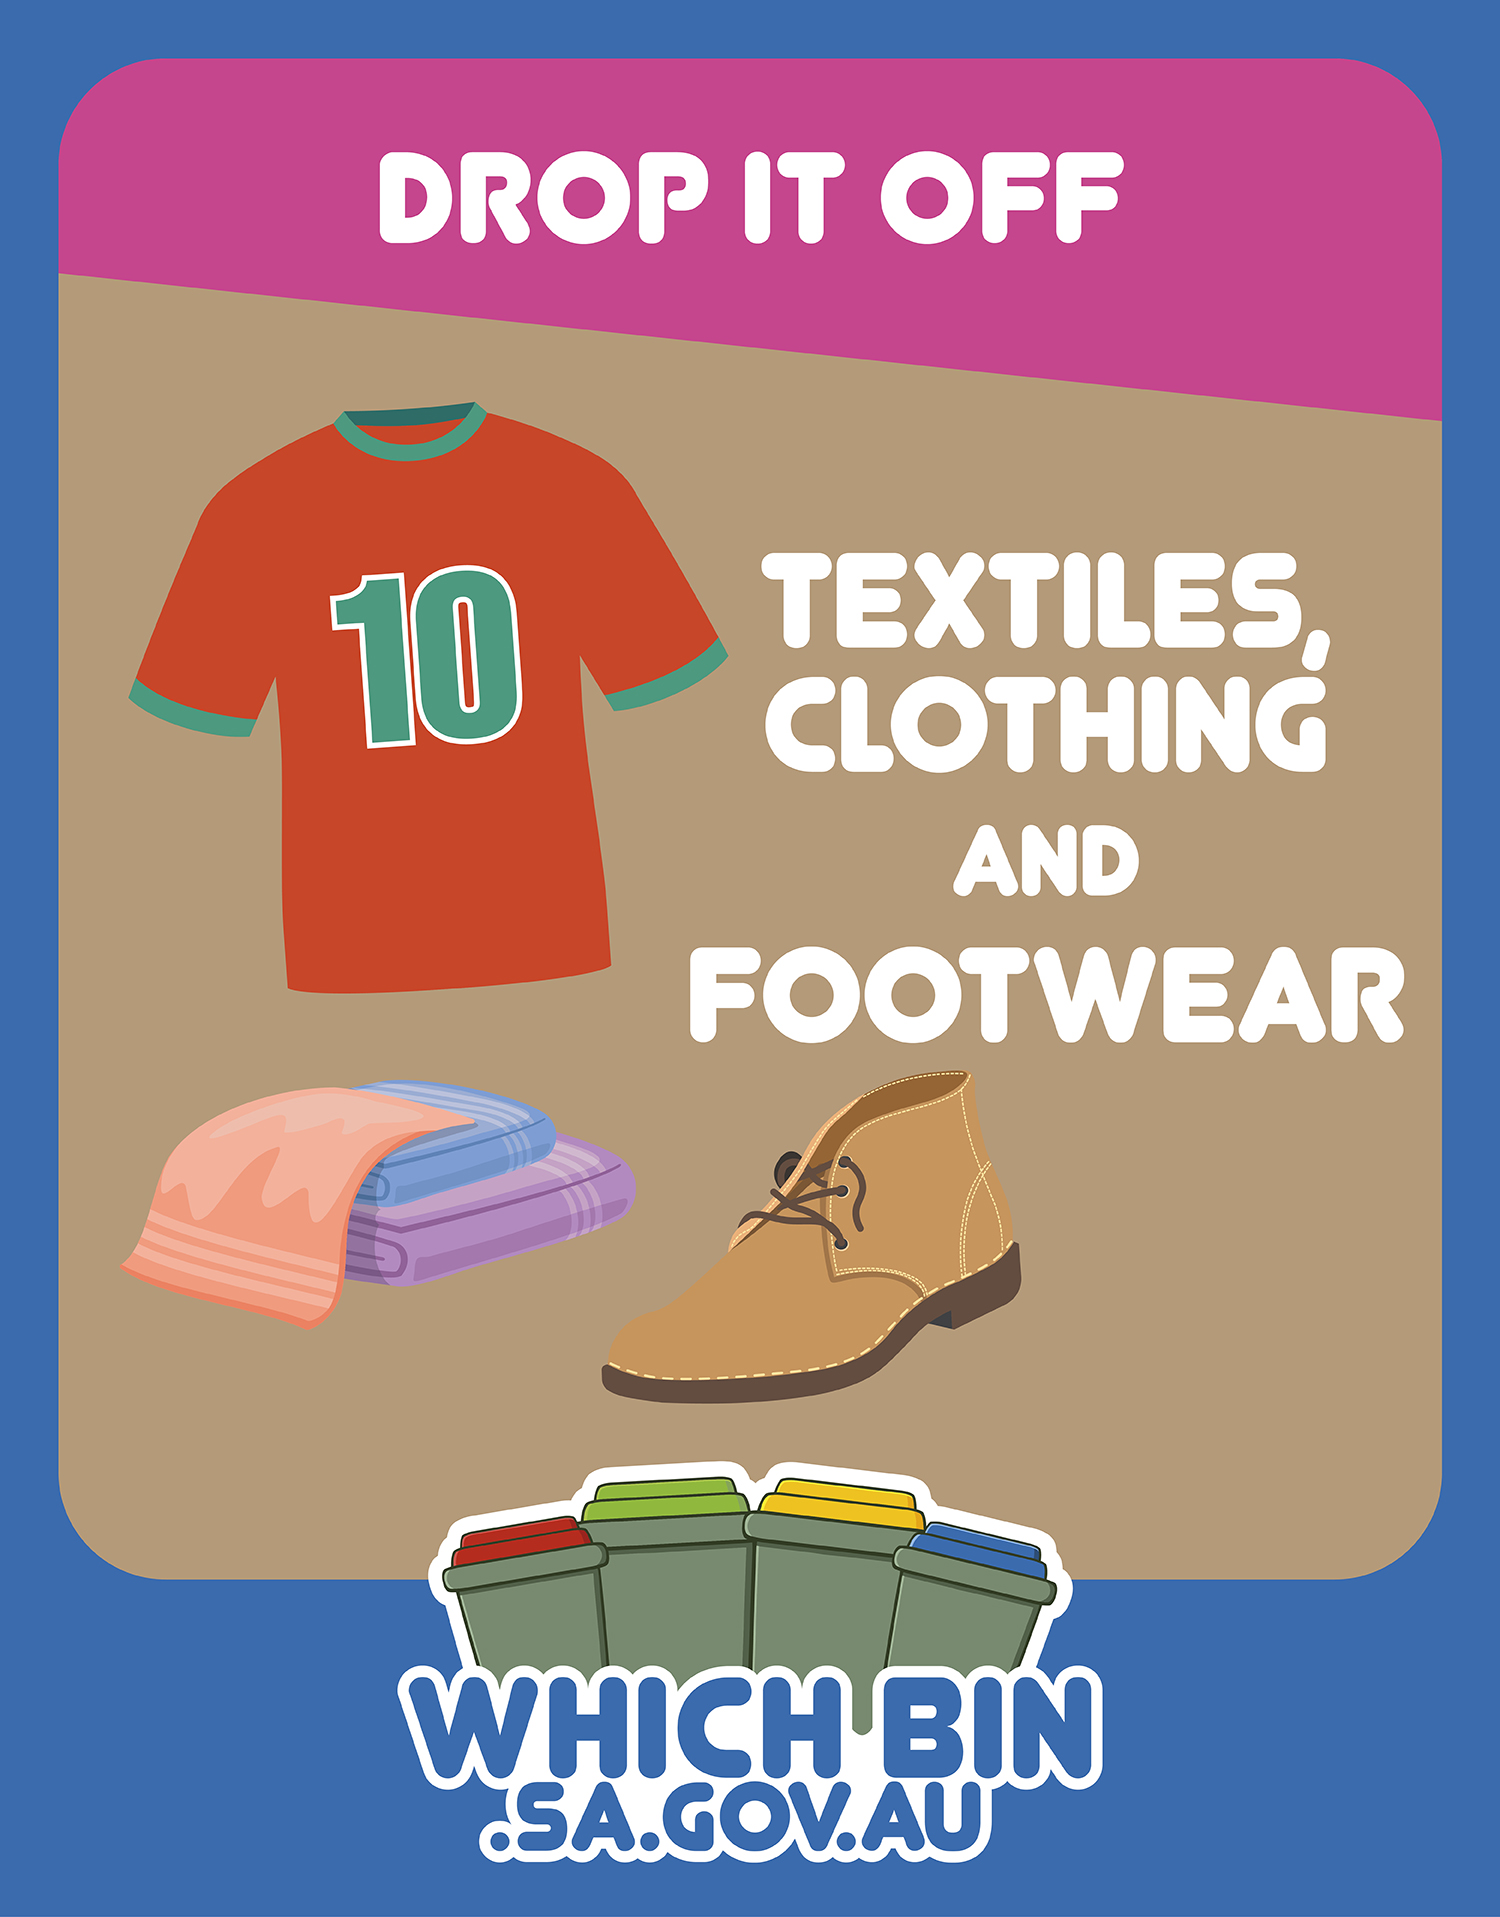 Drop it off: textiles, clothing and footwear